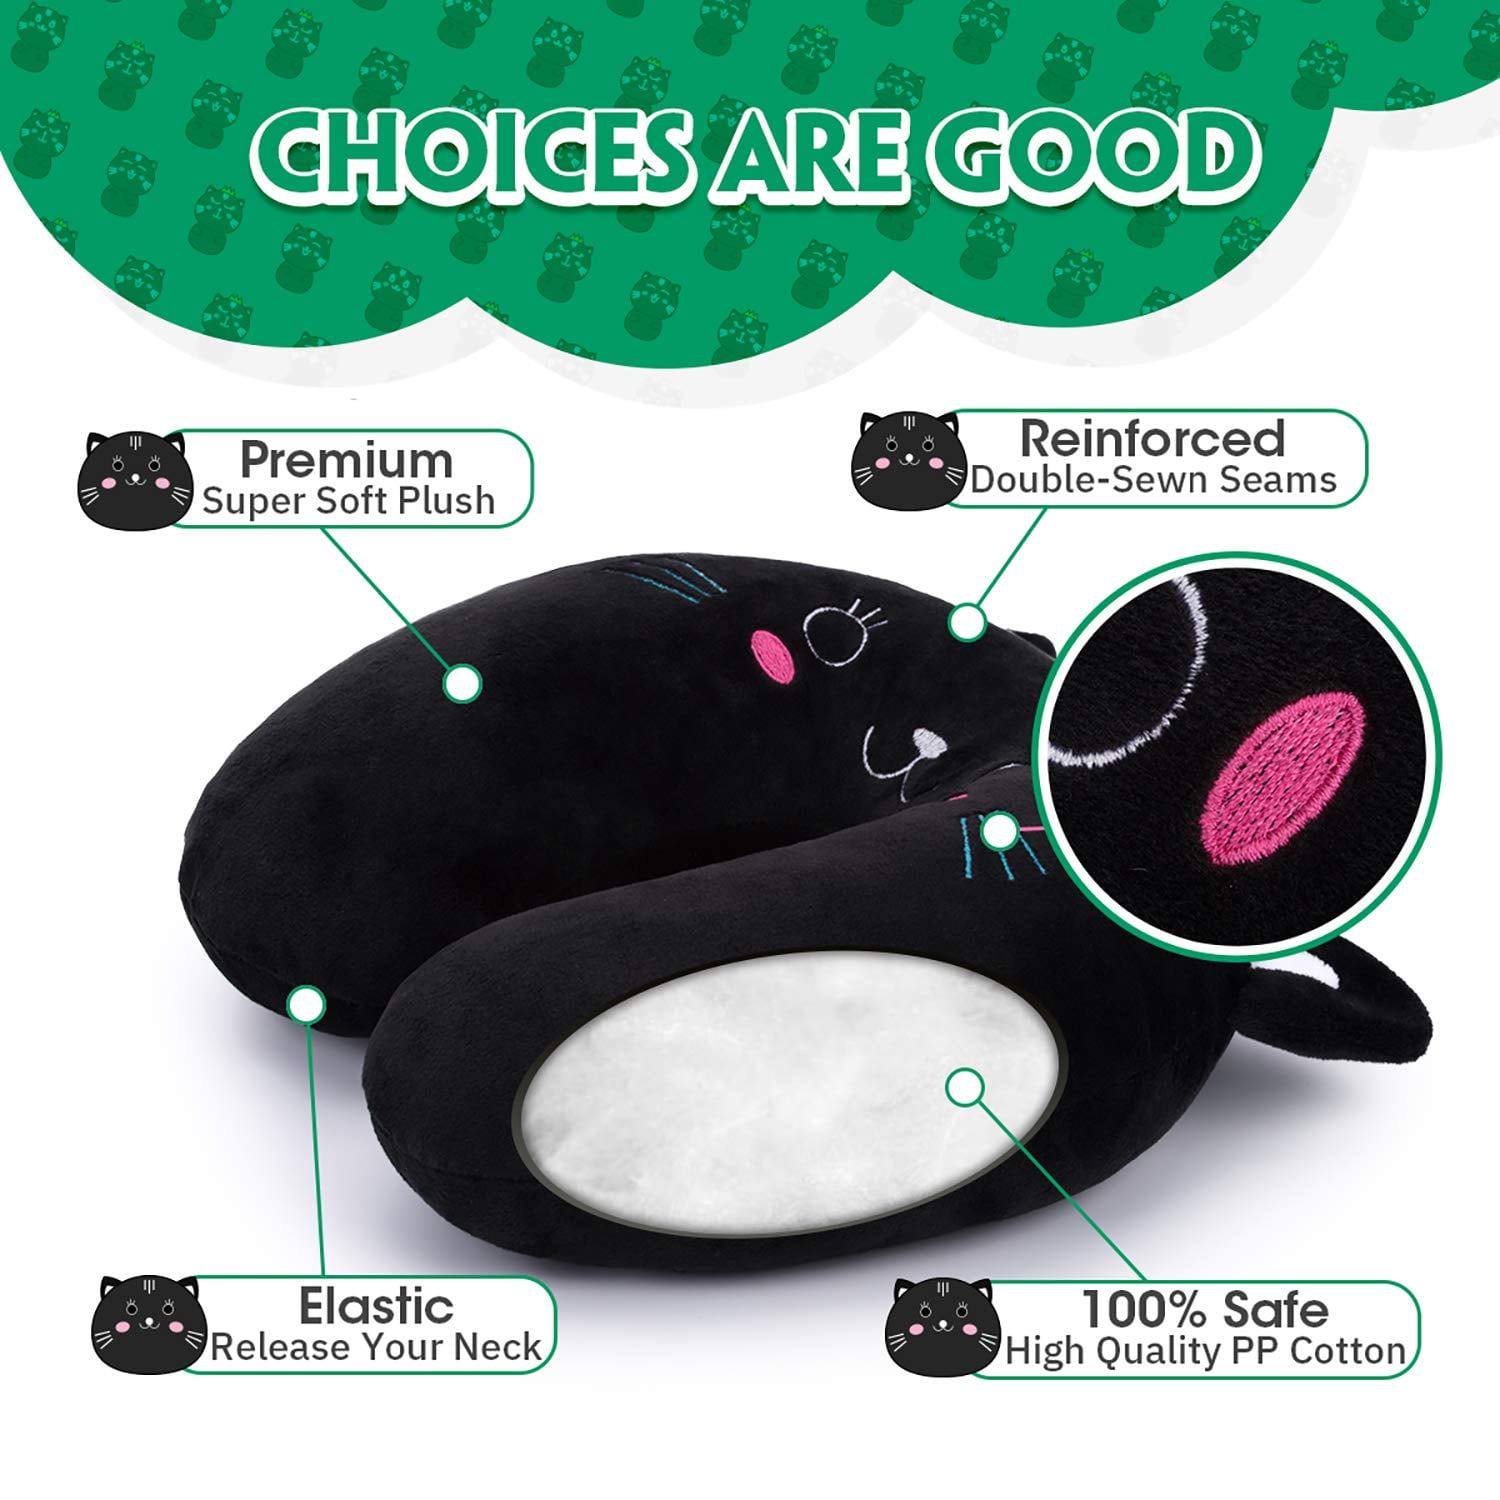 Kids Neck Pillow For Traveling - Travel Accessories For Airplane, Road Trip  - Chin Supporting To Stop Head From Falling Forward - Cute Mouse Animal Co